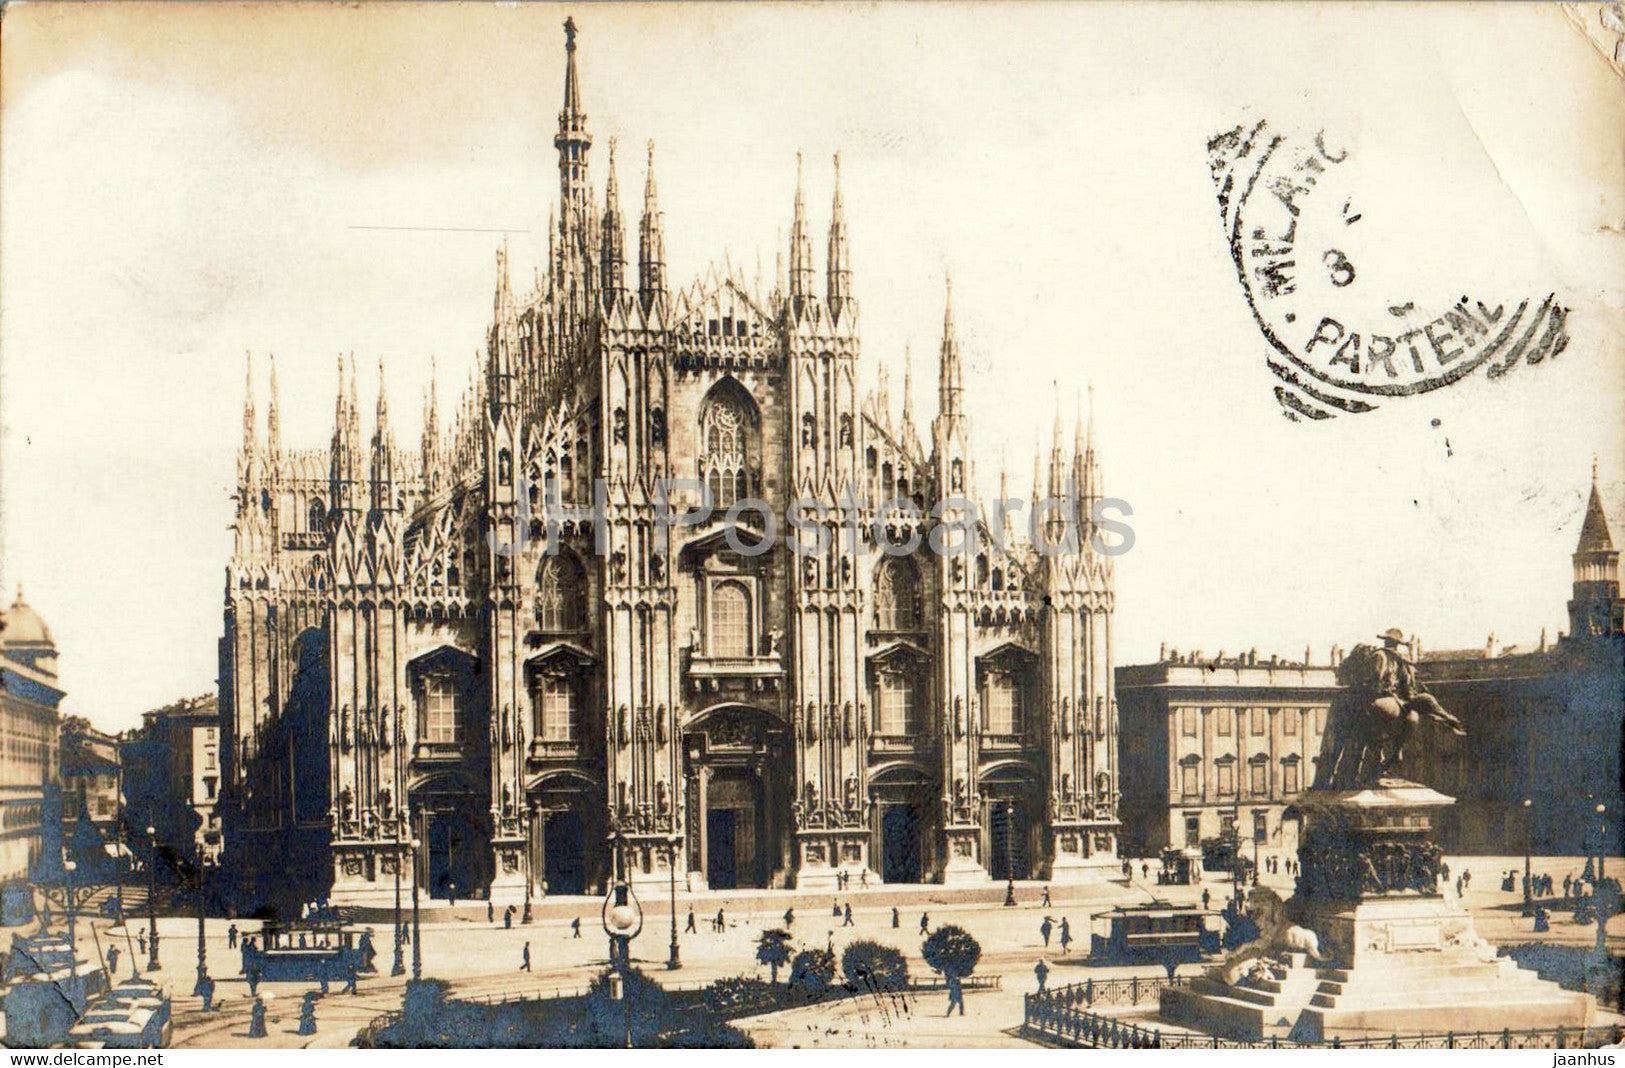 Milano - Milan - cathedral - old postcard - Italy - used - JH Postcards